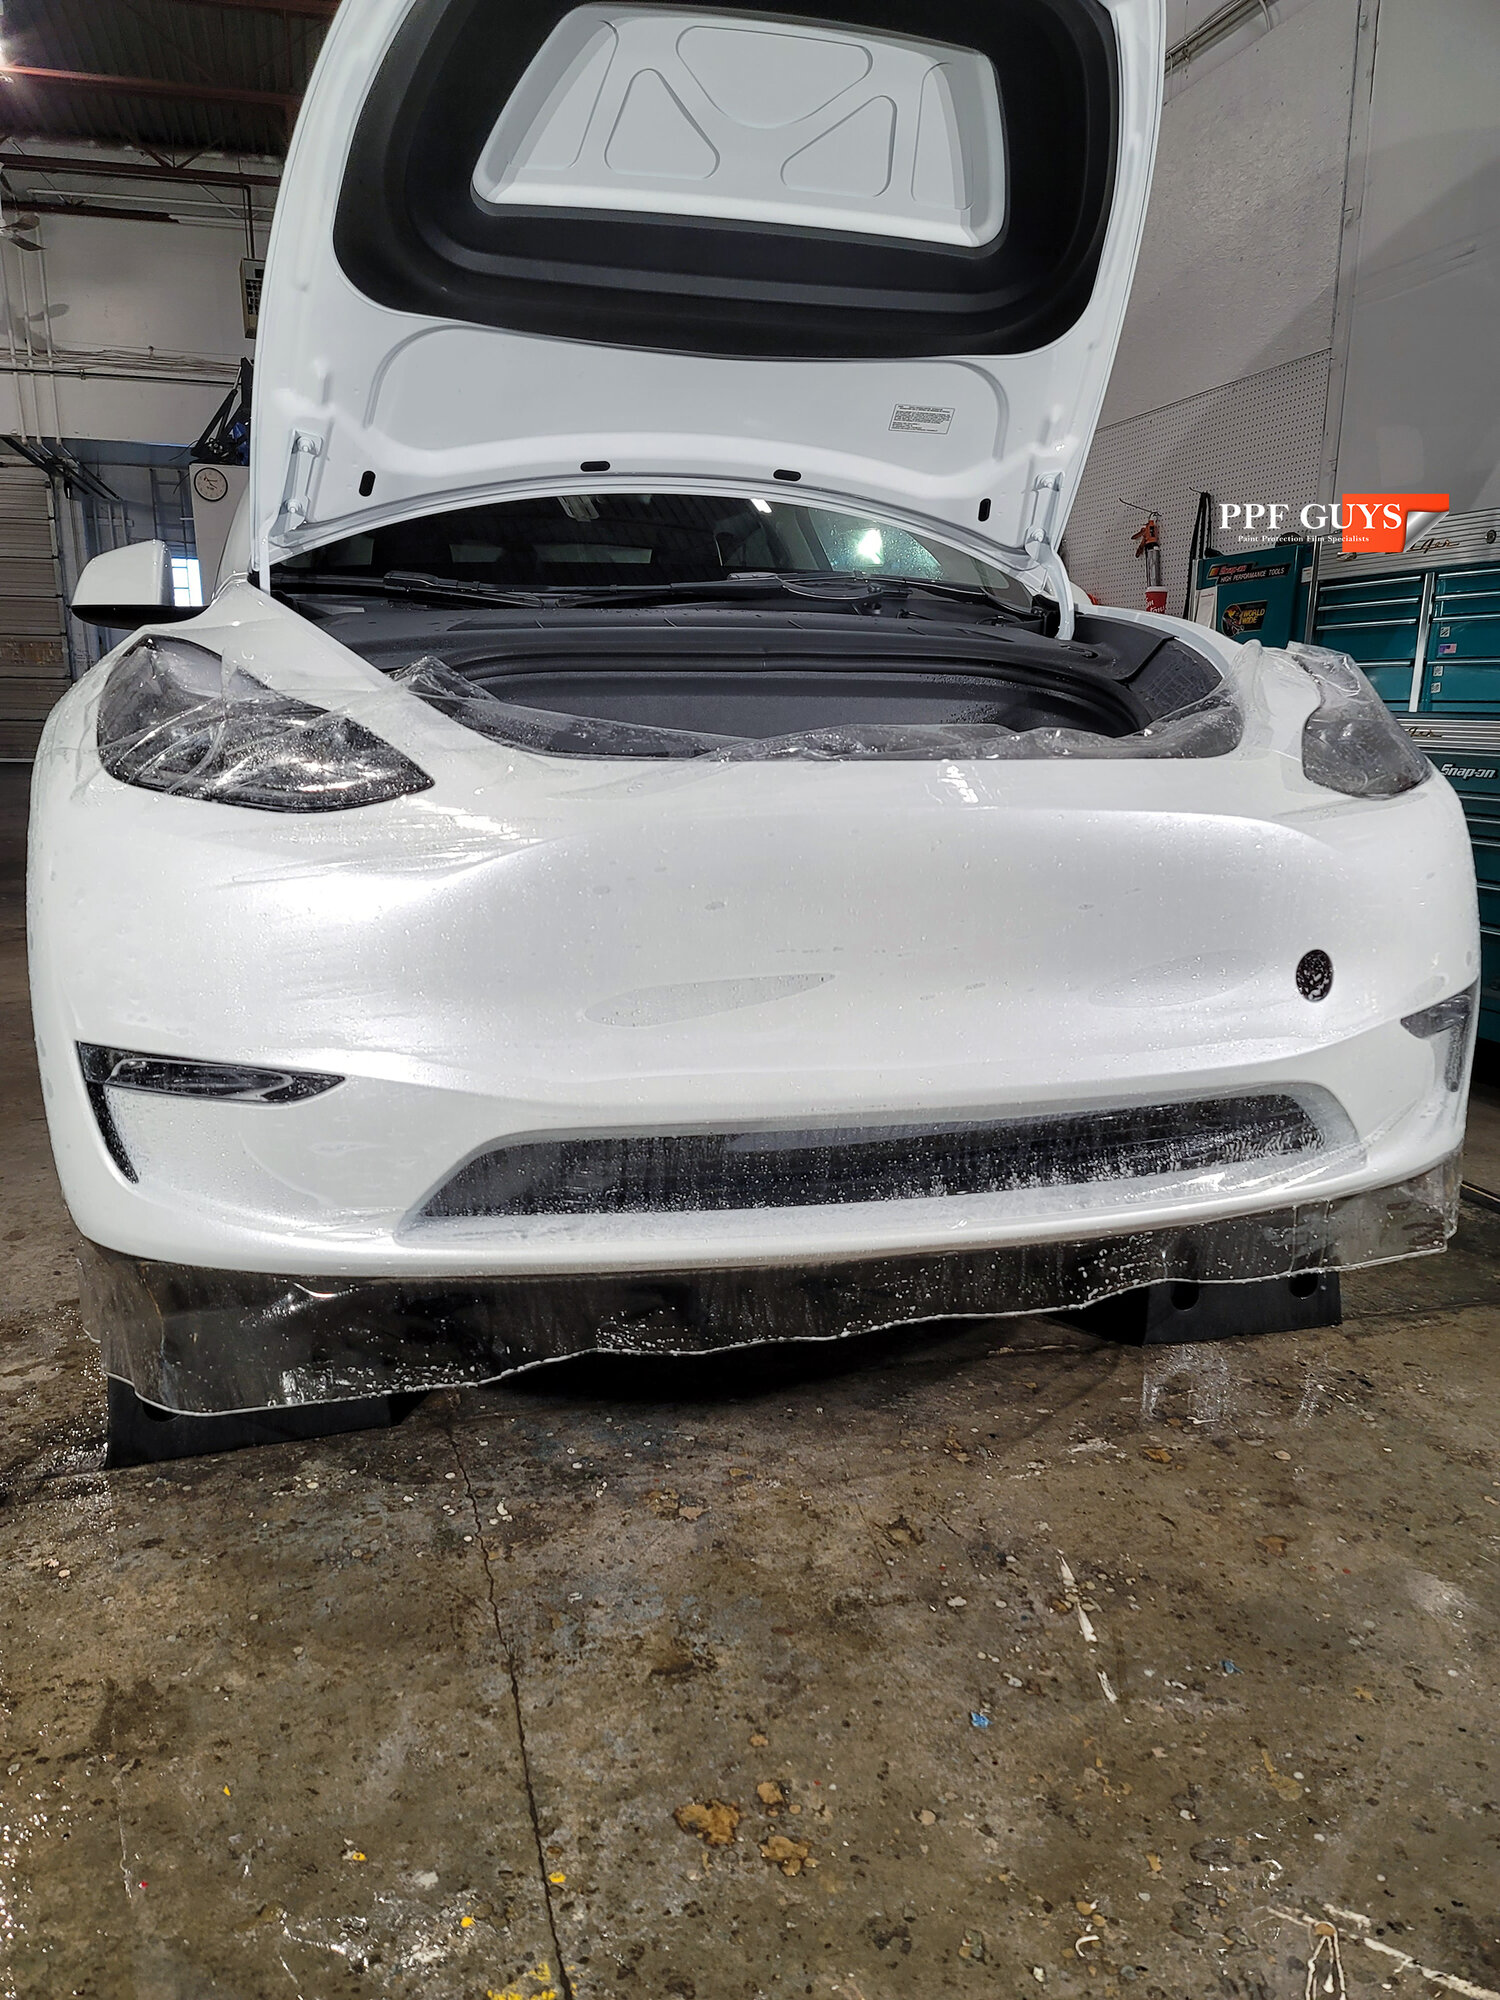 ppf guys white model y front end (1).jpg